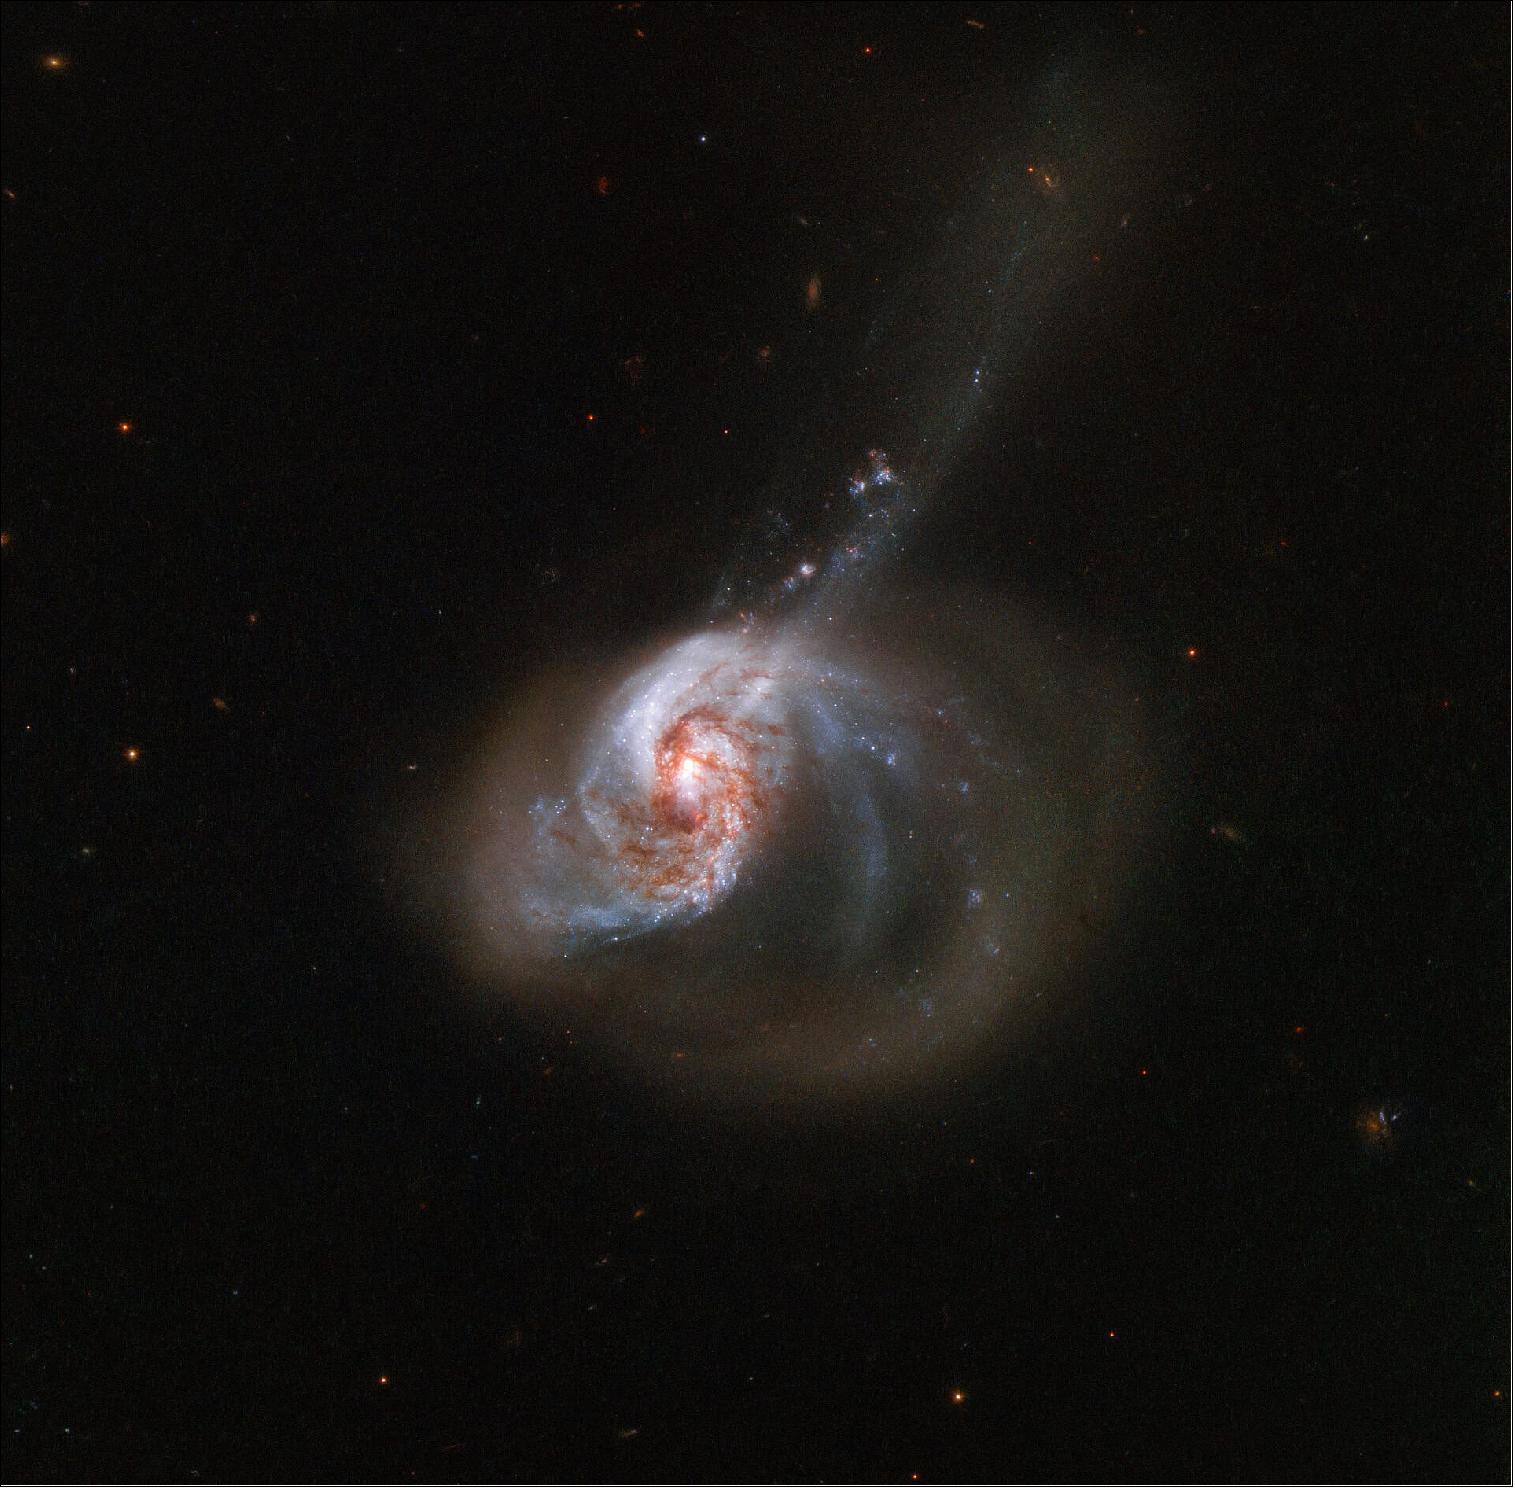 Figure 39: NGC 1614 is the result of a past galactic merger which created its peculiar appearance. The cosmic collision also drove a turbulent flow of interstellar gas from the smaller of the two galaxies involved into the nucleus of the larger one, resulting in a burst of star formation which started in the core and slowly spread outwards through the galaxy (image credit: ESA/Hubble & NASA, A. Adamo; CC BY 4.0)